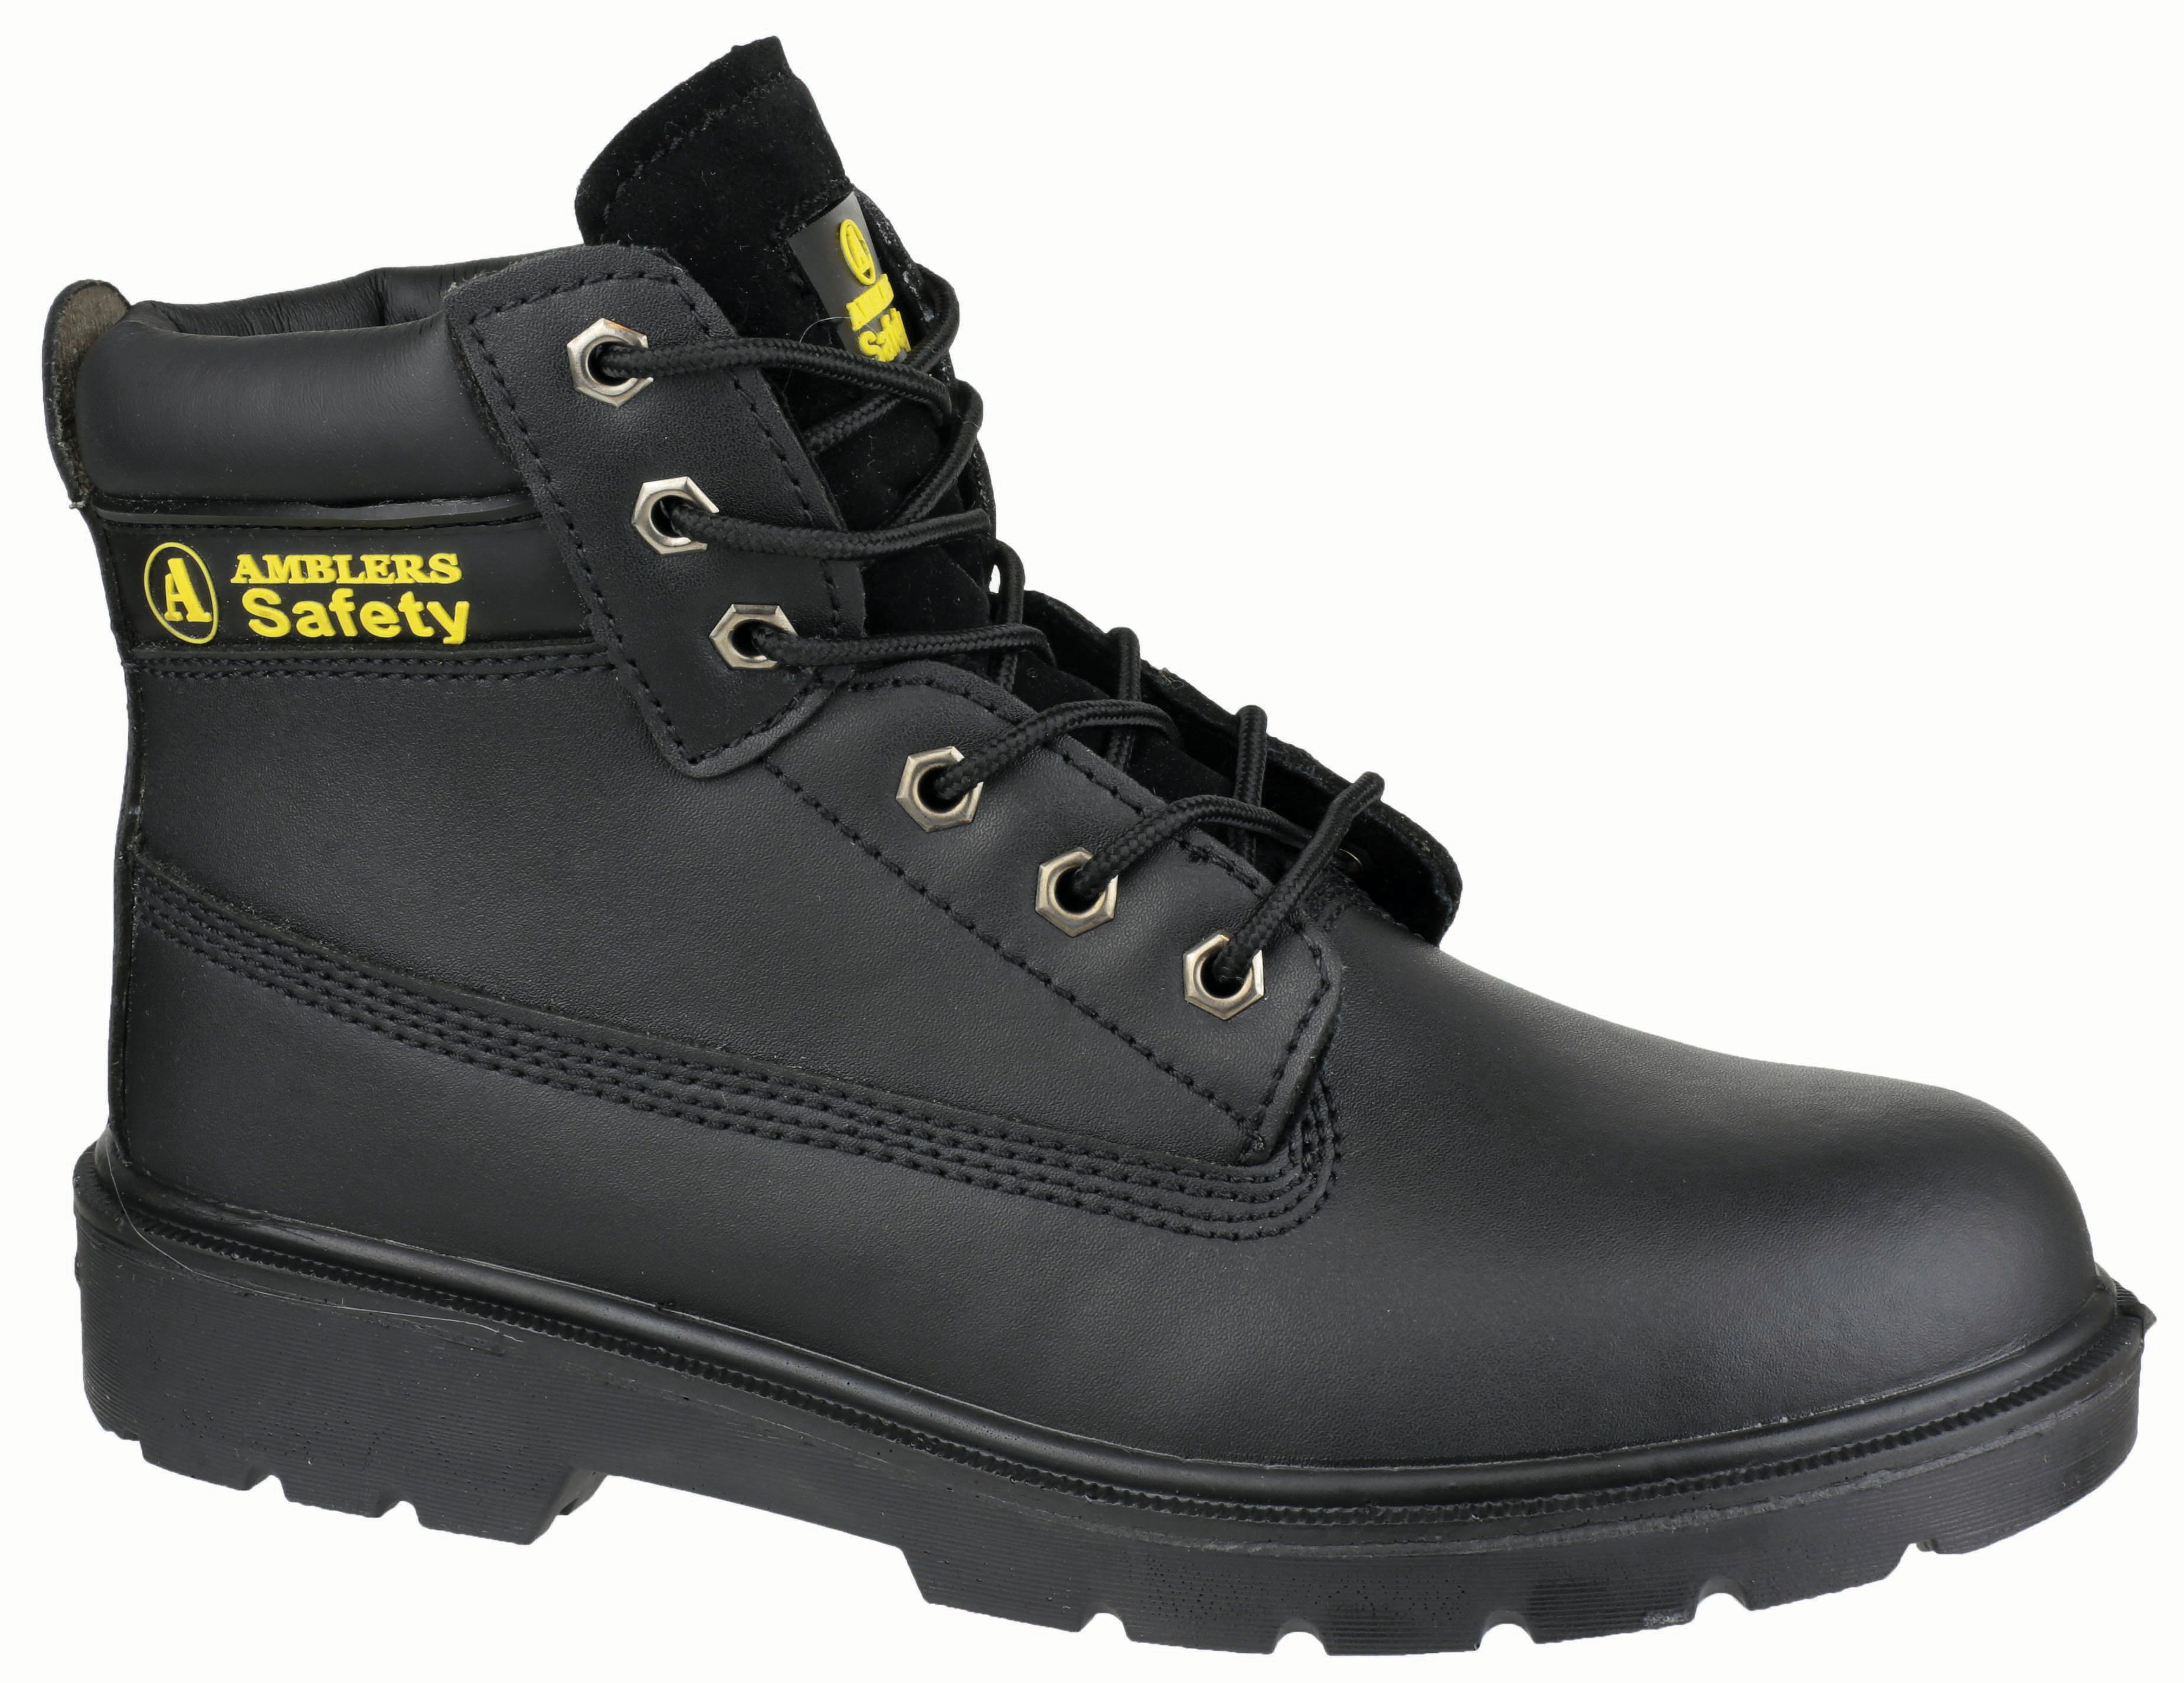 Image of Amblers Safety FS112 Safety Boot - Black Size 10.5